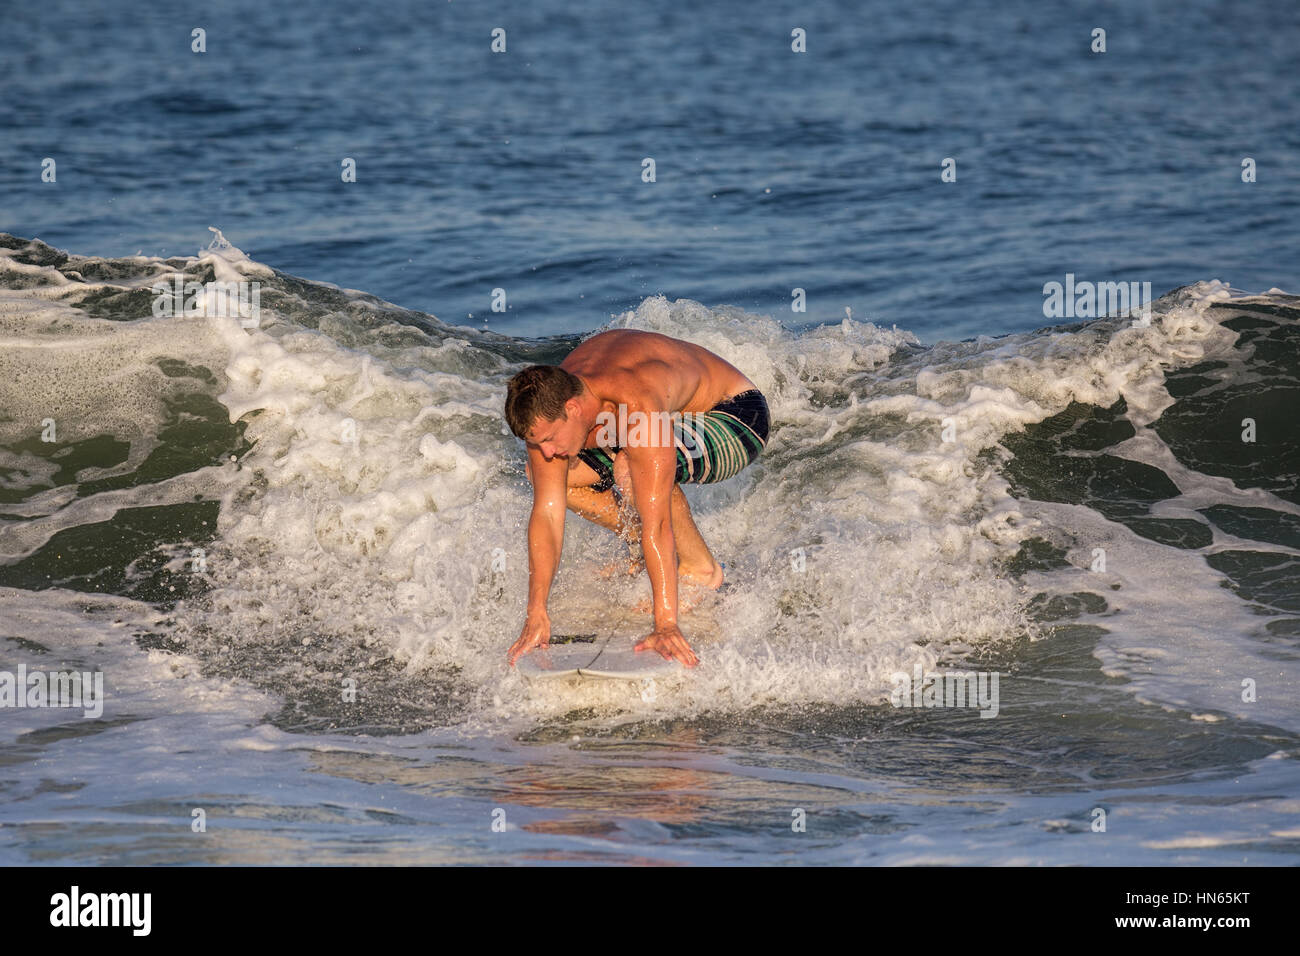 A young man in his early 20's surfing. He has caught a wave in the Atlantic Ocean. The location is the New Jersey Shore. Stock Photo